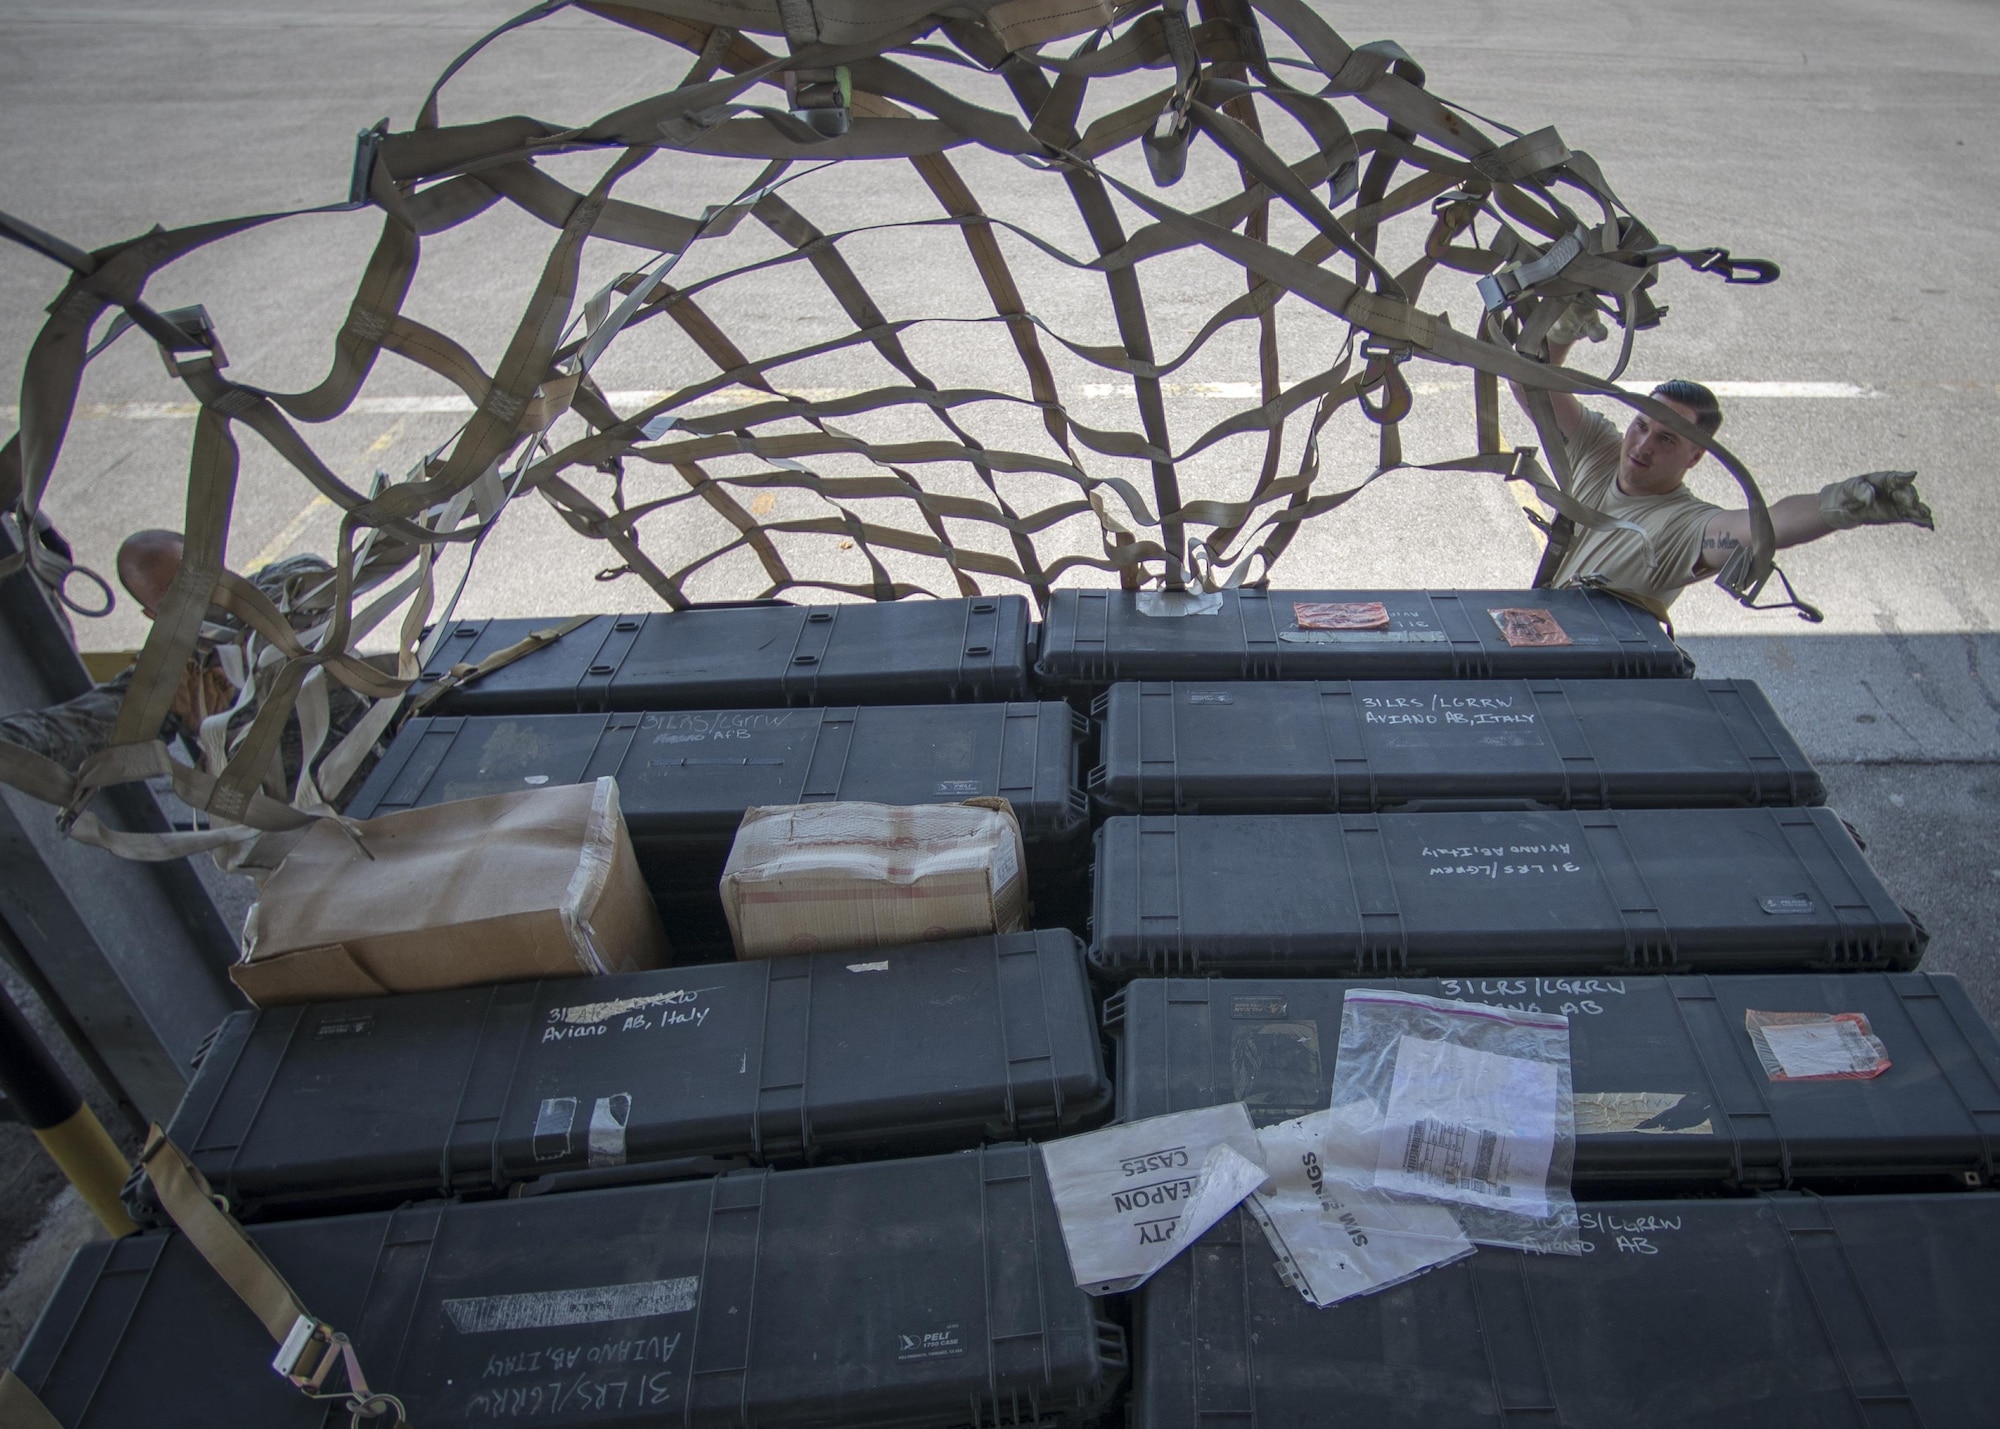 Staff Sgt. Patrick Staunton and Senior Airmen Cameron Jones, 31st Maintenance Squadron phase inspection team members, participate in cargo preparation and pallet buildup training Aug. 8, 2016, at Aviano Air Base, Italy. Nets and straps are used to secure the aircraft’s cargo onto pallets. The straps are tested to withstand up to eight Gs during transportation. (U.S. Air Force photo/Airman 1st Class Cory W. Bush)